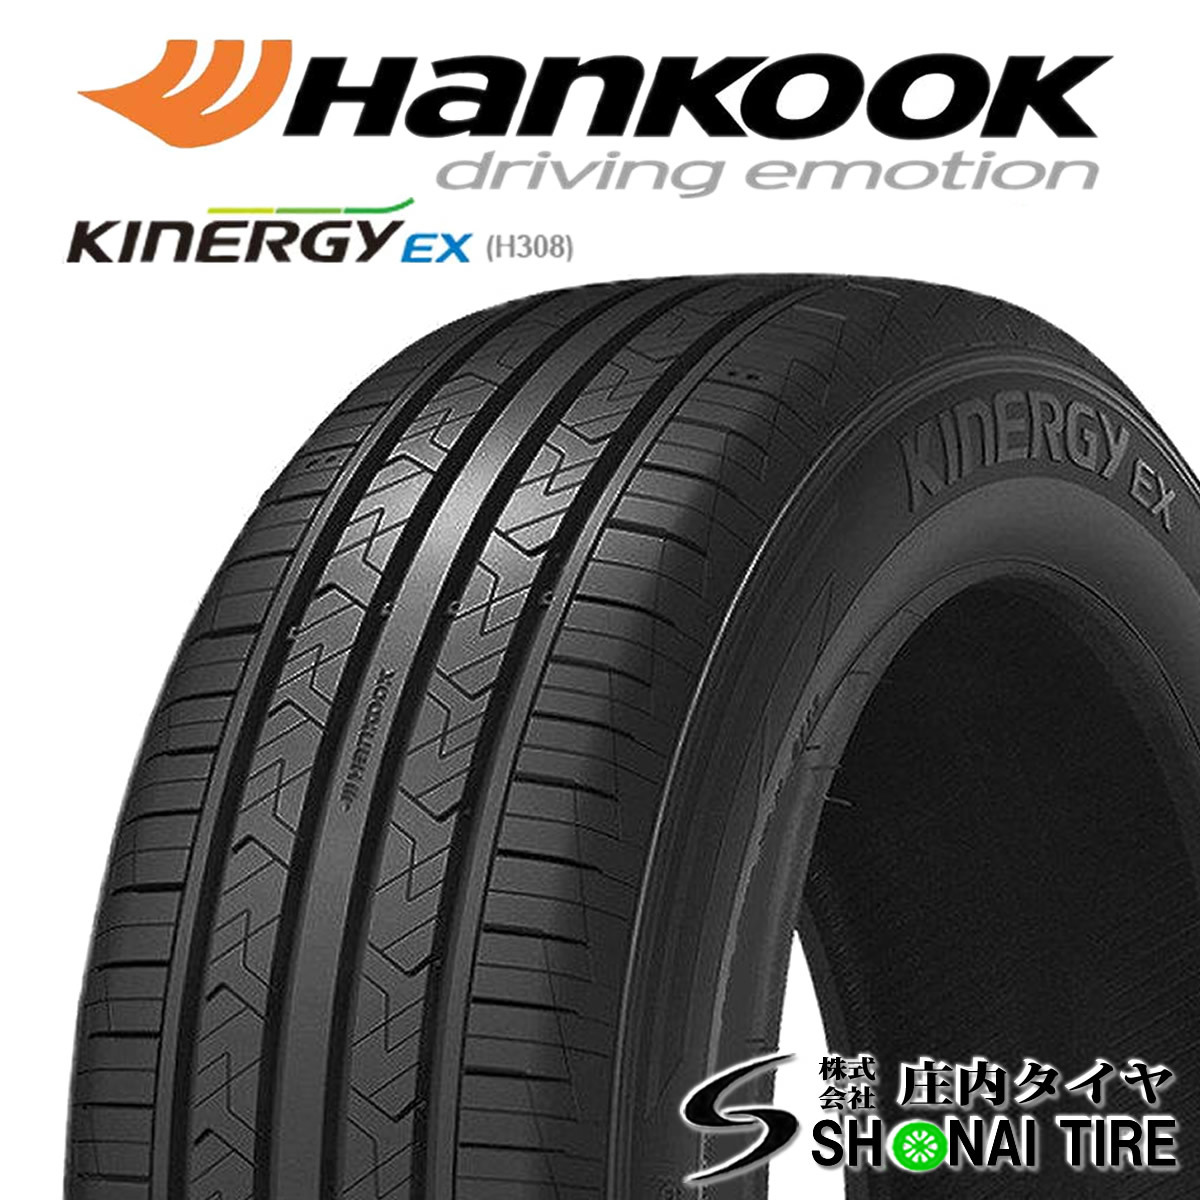  stock necessary verification company addressed to free shipping 165/60R15 81H XL Hankook KINERGY EX H308 summer 1 pcs price Solio Hustler cast Delica D2 NO,HK006-1